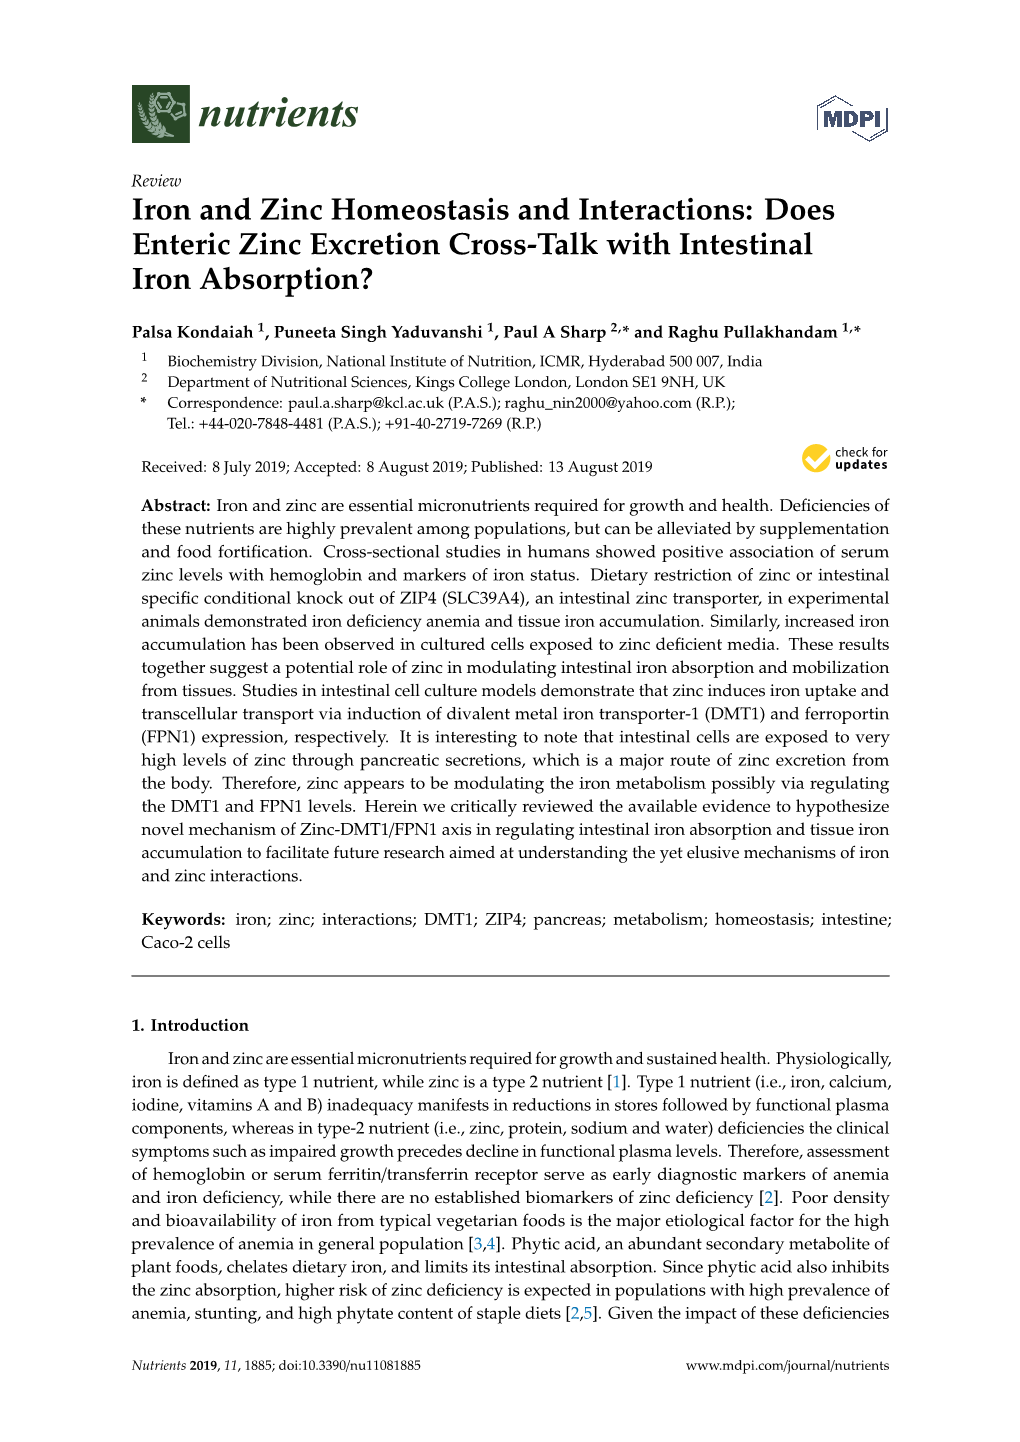 Does Enteric Zinc Excretion Cross-Talk with Intestinal Iron Absorption?